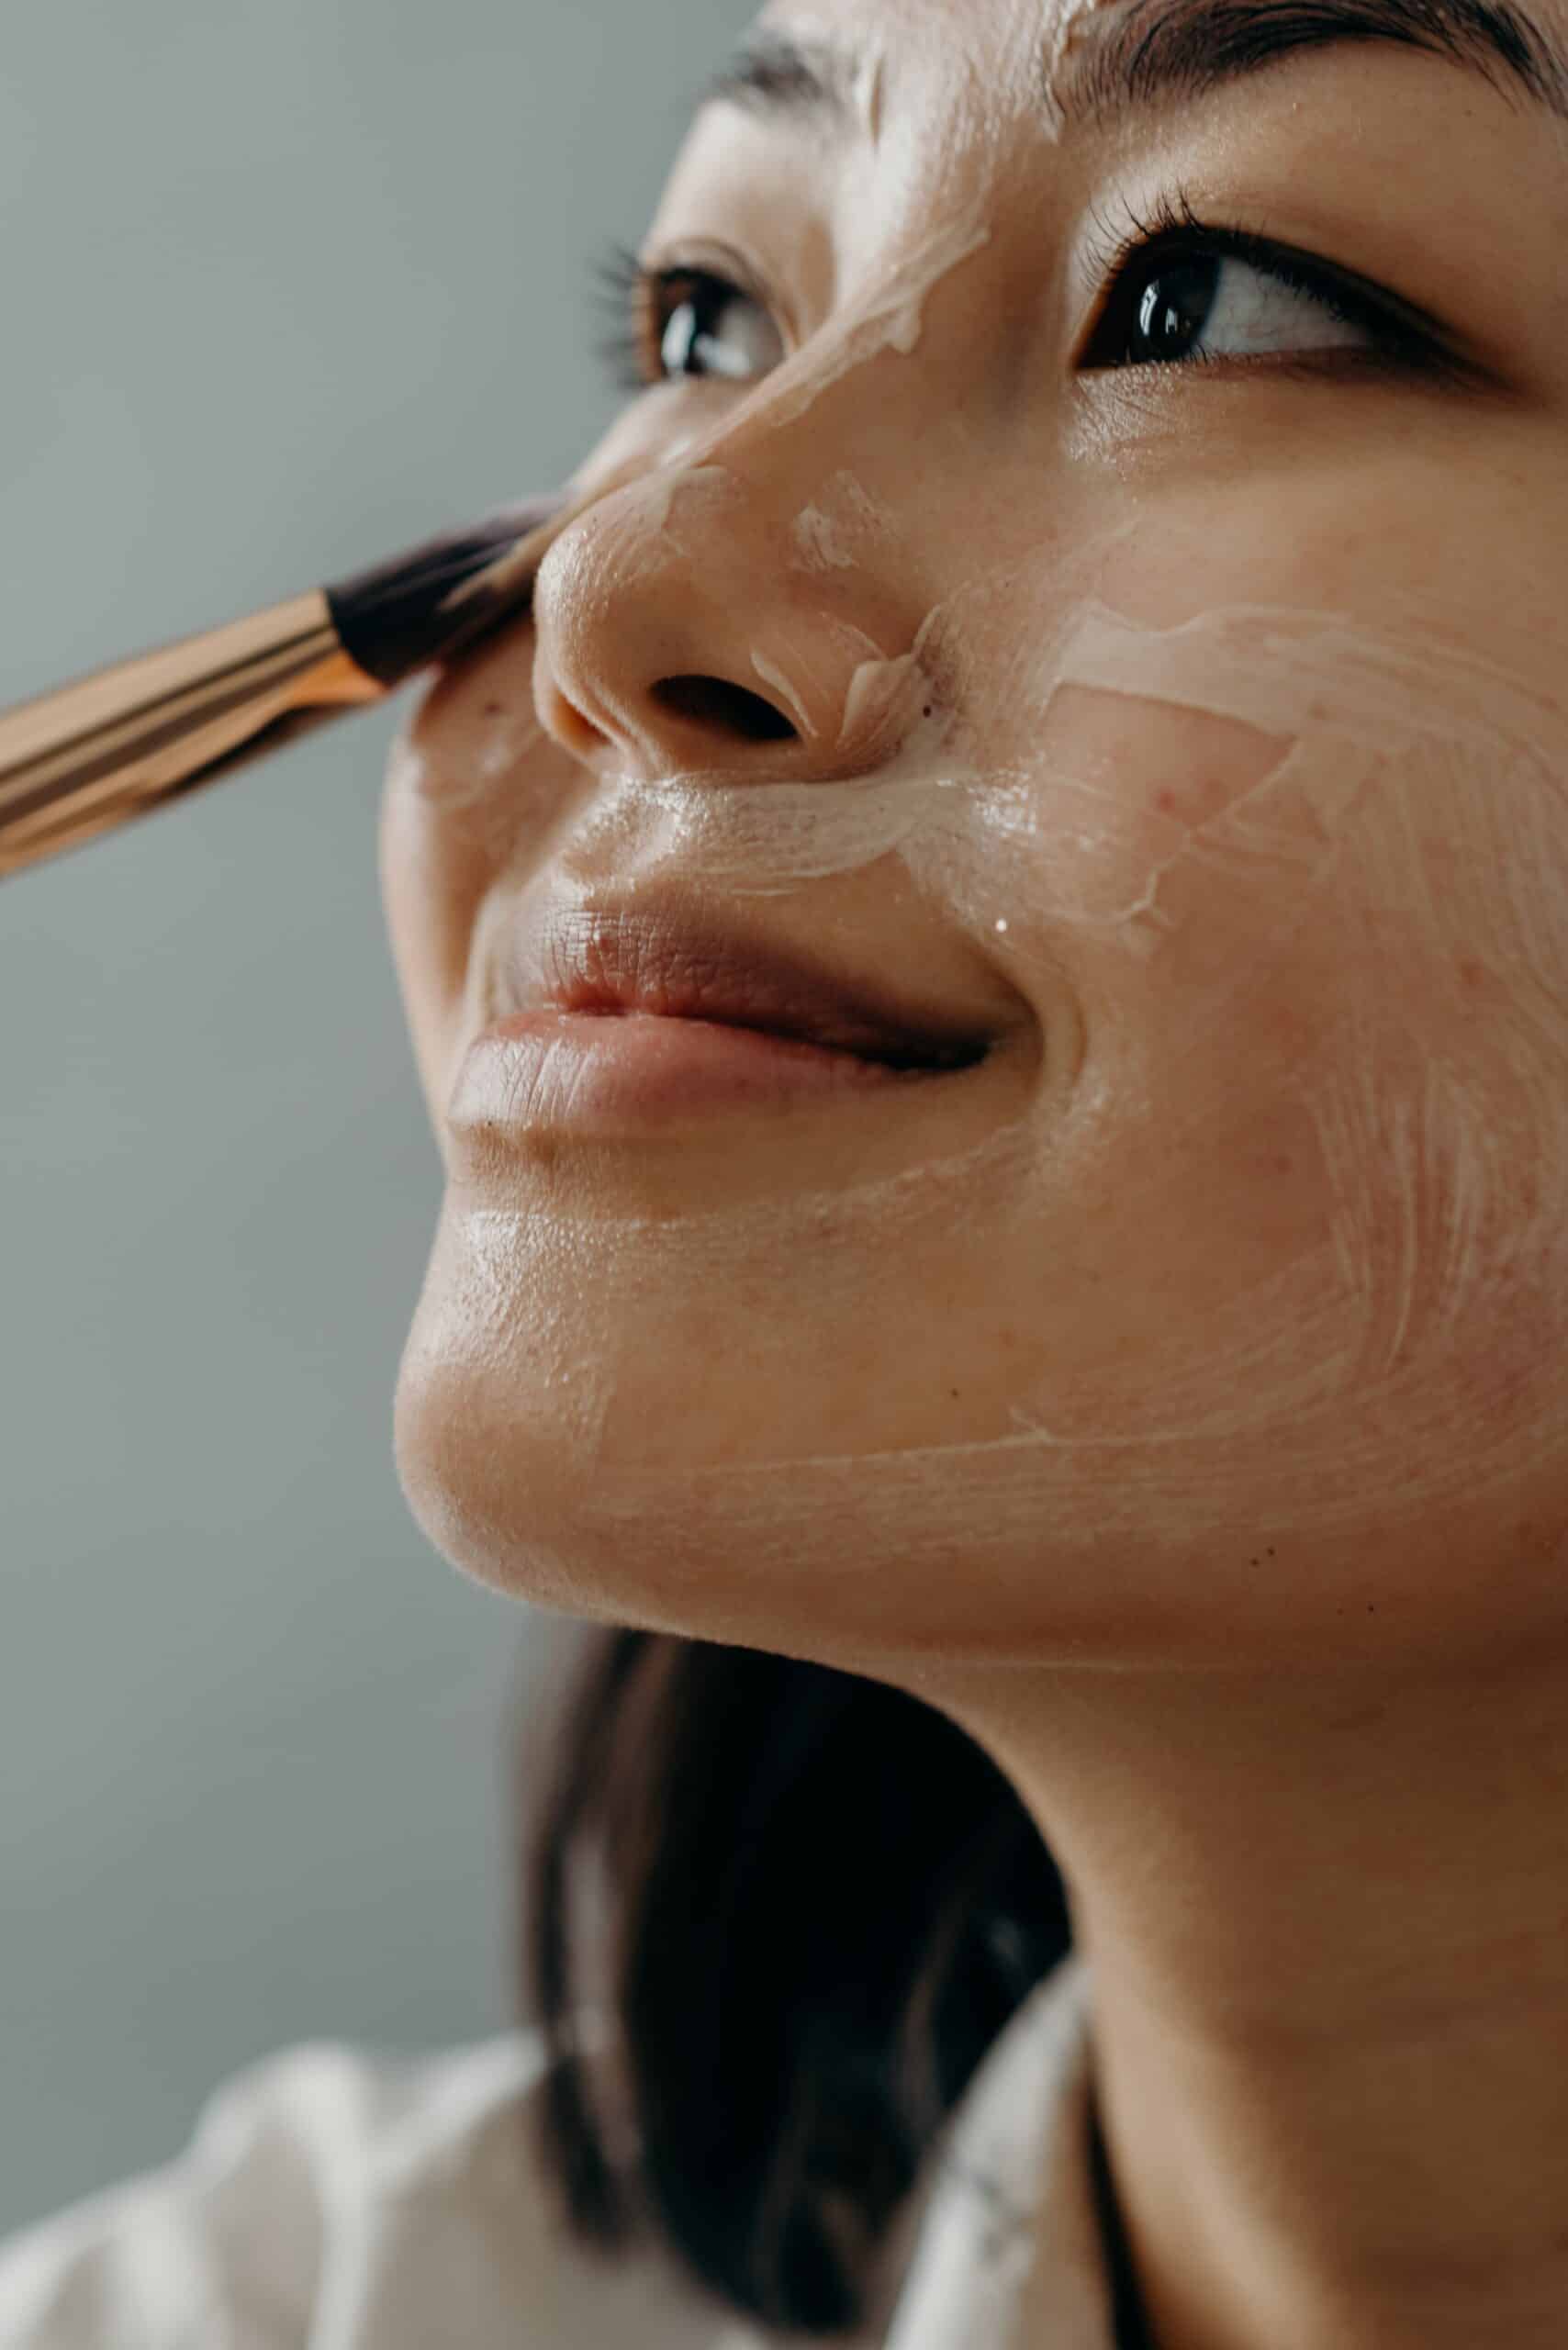 Asian woman applying skincare mask on her face